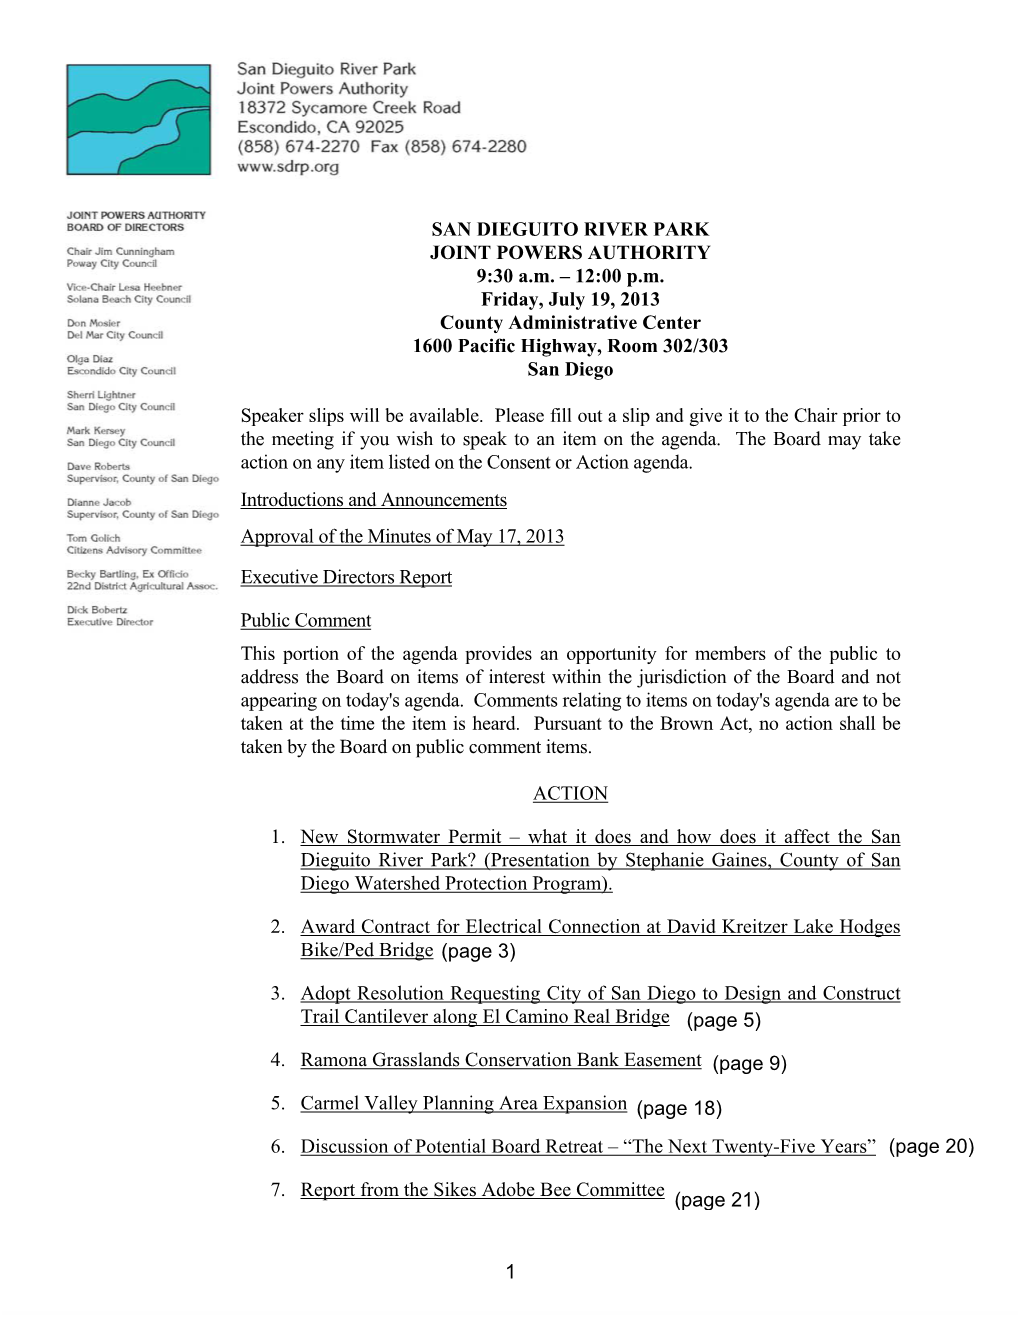 SAN DIEGUITO RIVER PARK JOINT POWERS AUTHORITY 9:30 A.M. – 12:00 P.M. Friday, July 19, 2013 County Administrative Center 1600 Pacific Highway, Room 302/303 San Diego